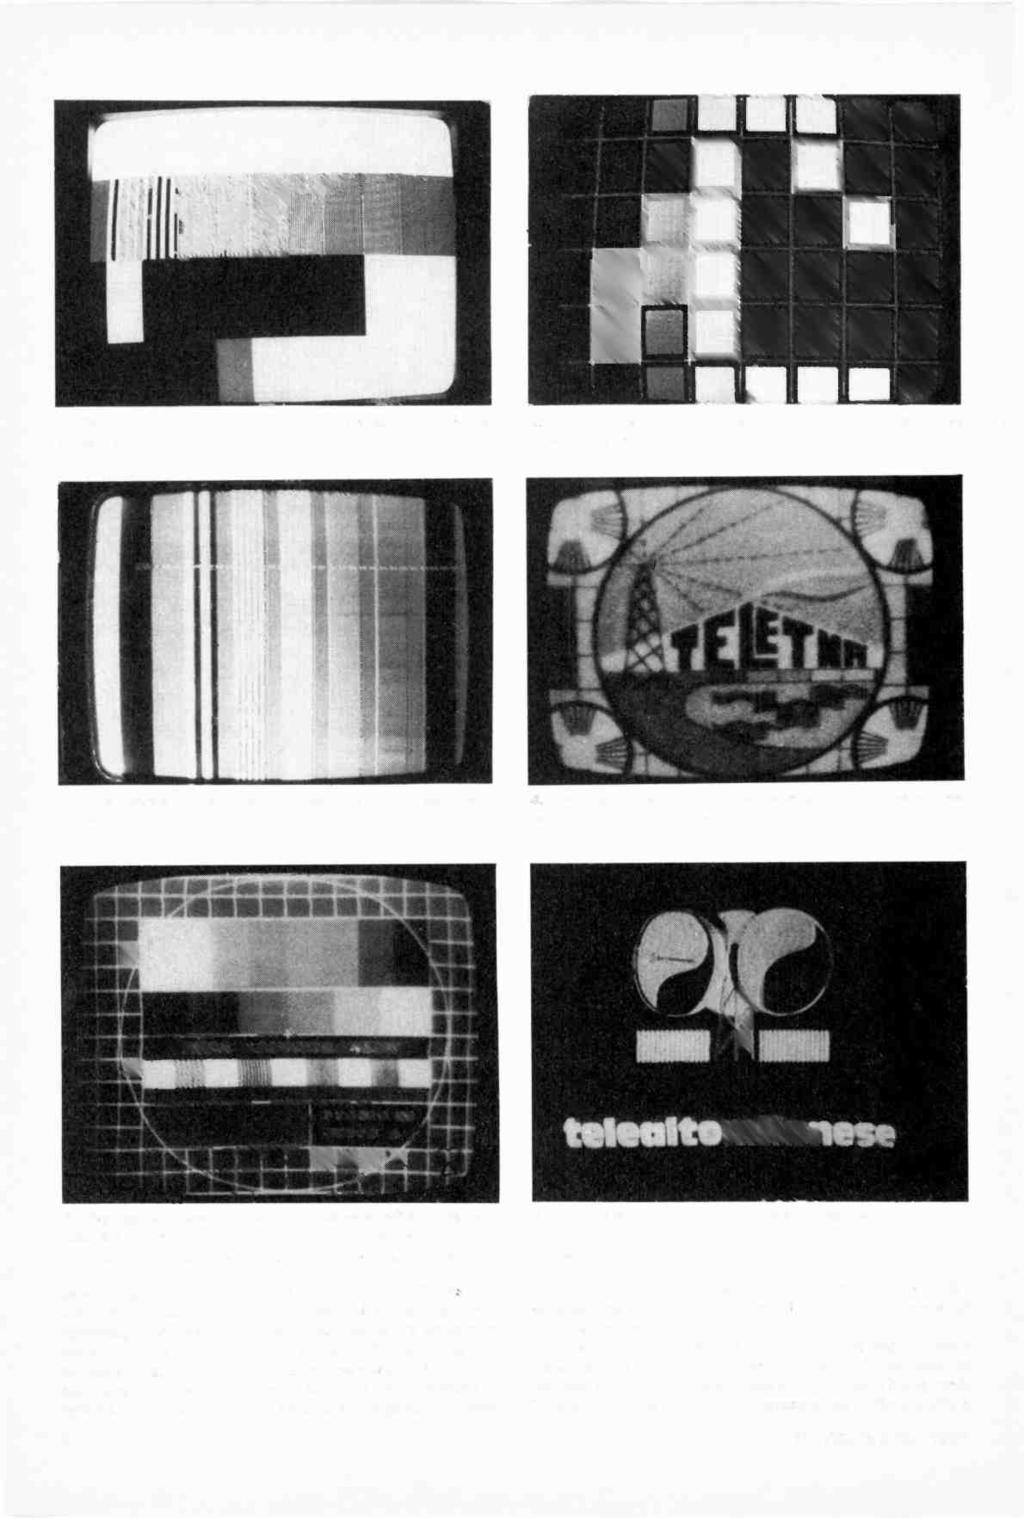 1. The monochrome test pattern at present being used by the three French networks. 2. The convergence crosshatch pattern, with half -tones, used by the three French networks. 3.